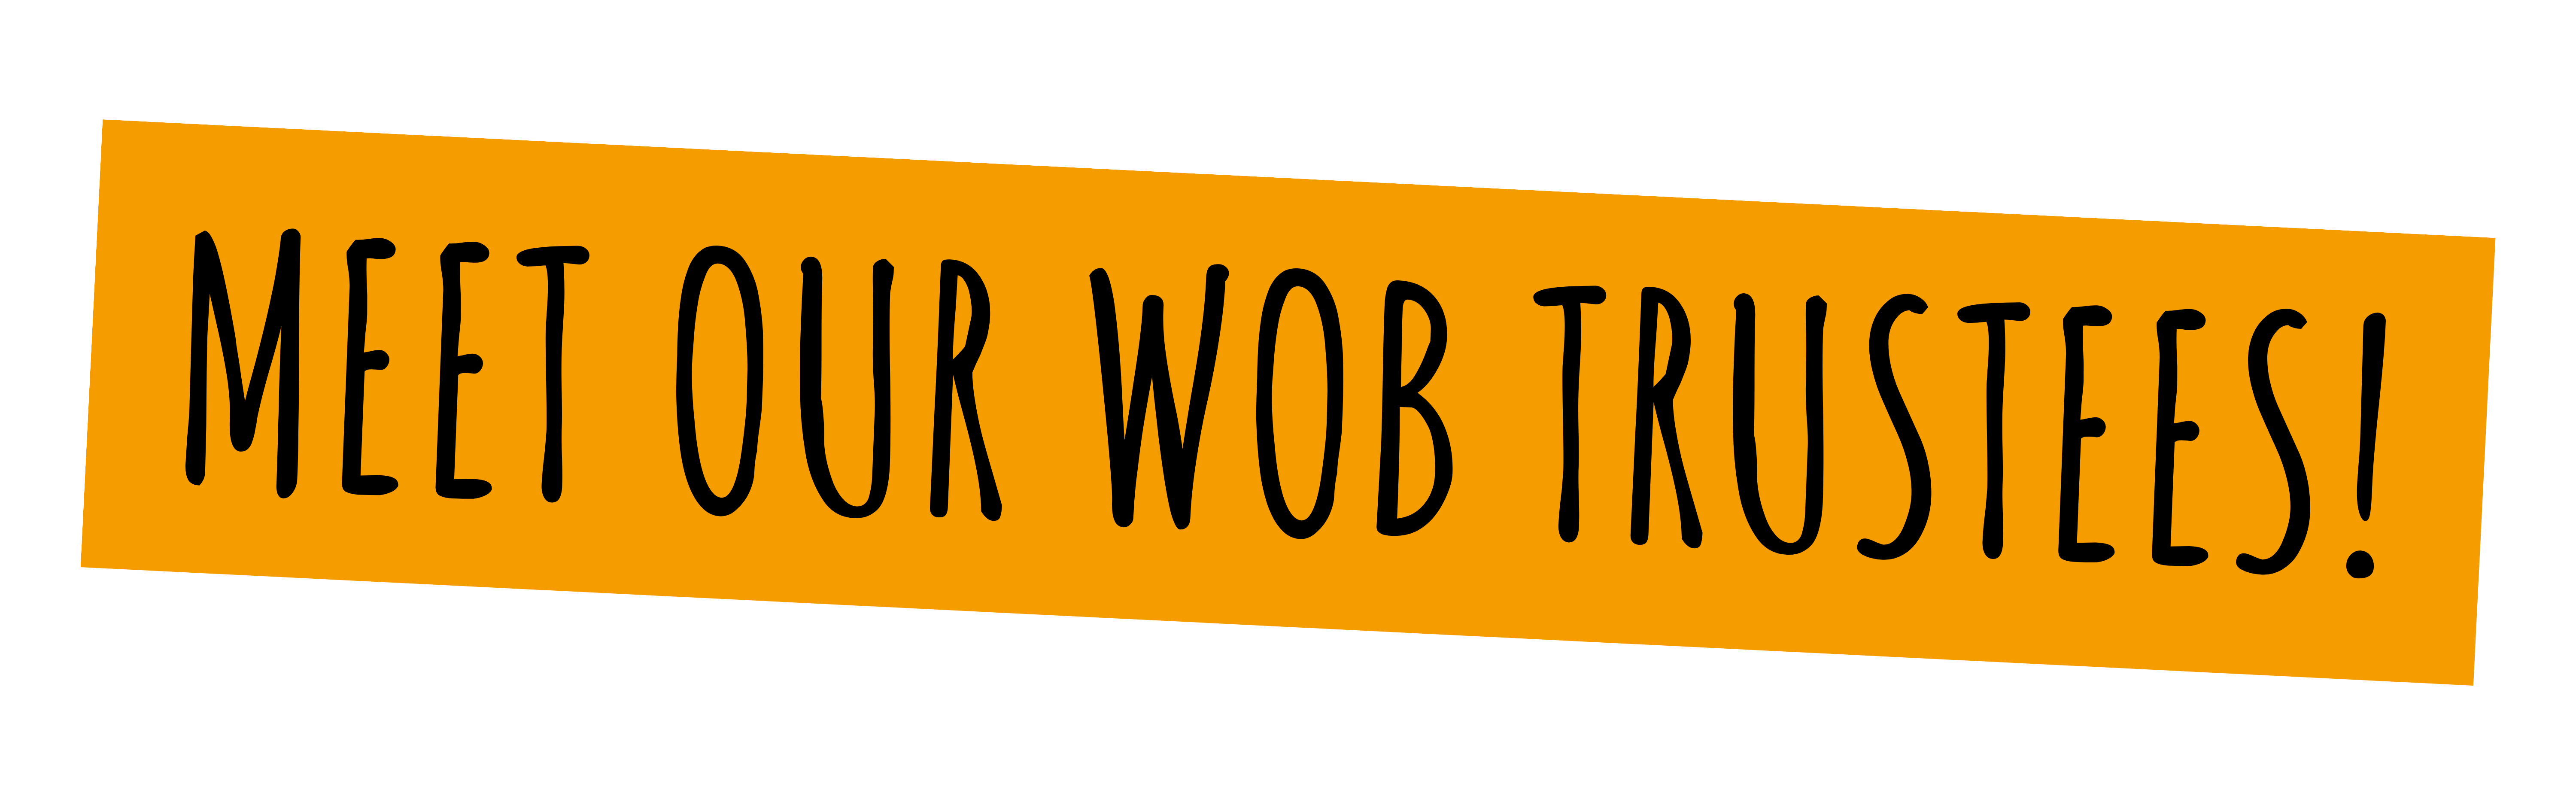 Meet our Wob Trustees